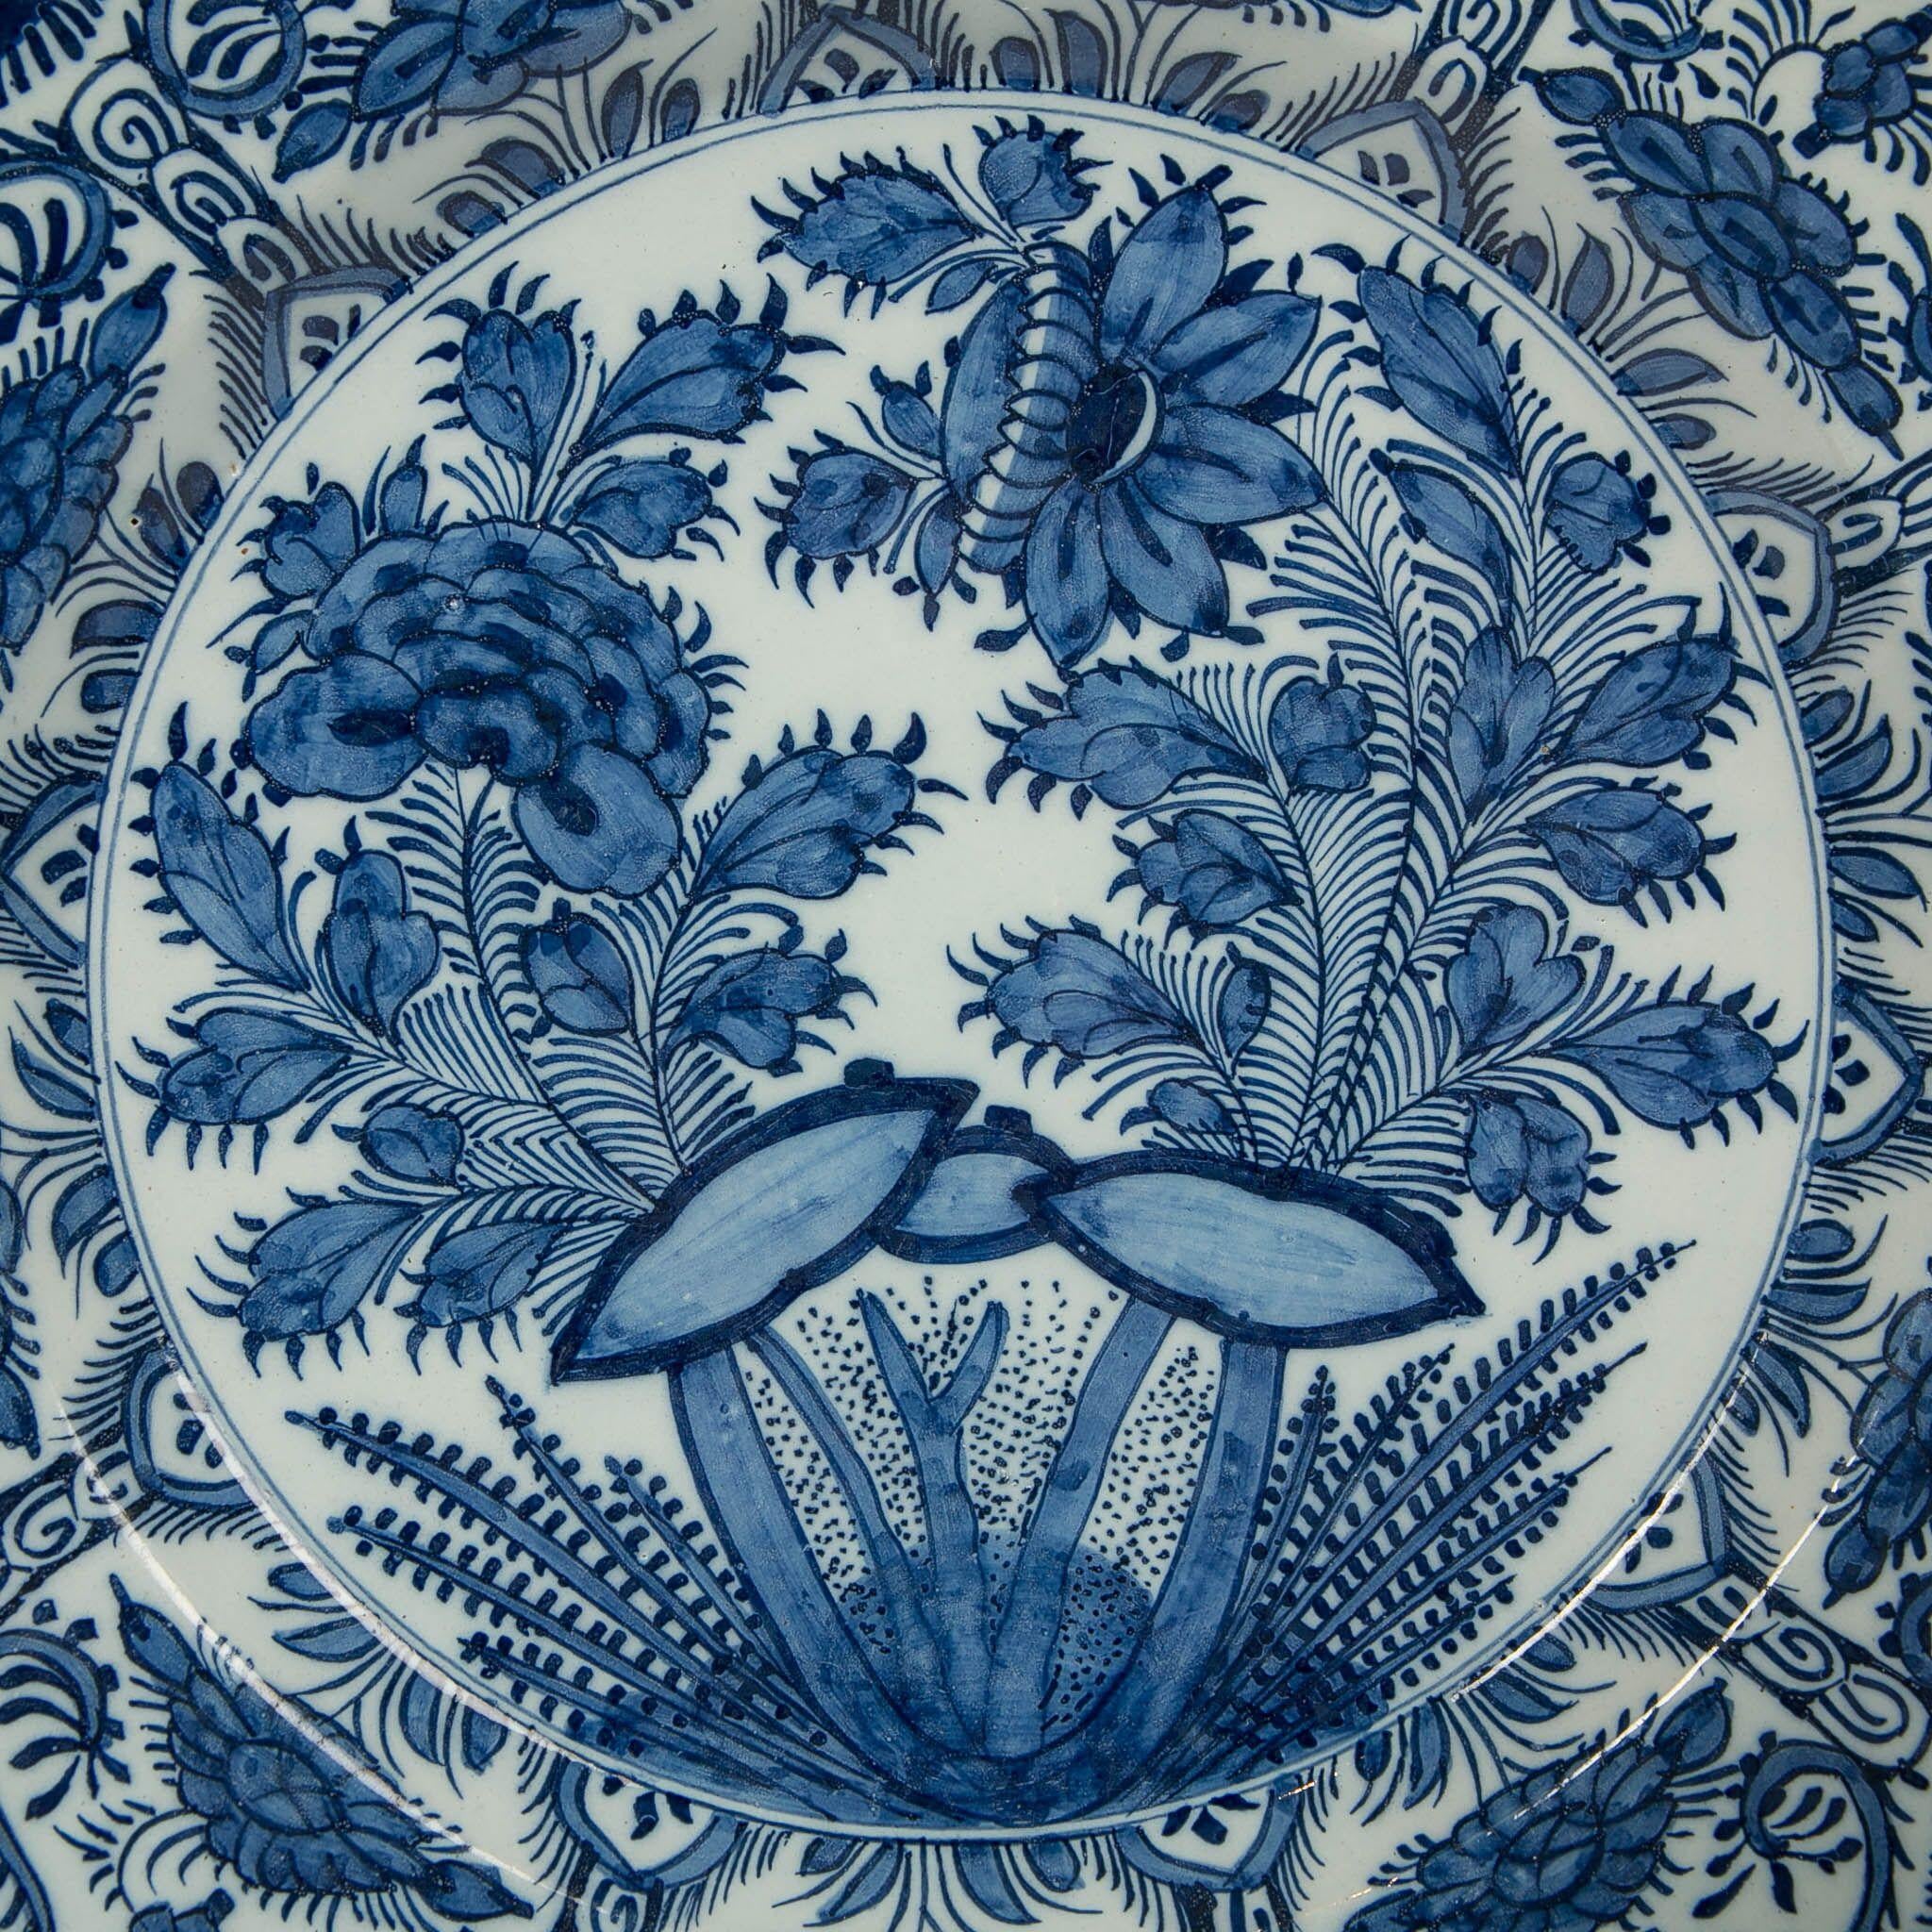 Why we love it: The scene is beautiful and slightly mysterious
We are pleased to offer this beautiful pair of large fully painted 18th century Dutch Delft Blue and White chargers. In the center we see a vibrant, hand-painted garden scene with a